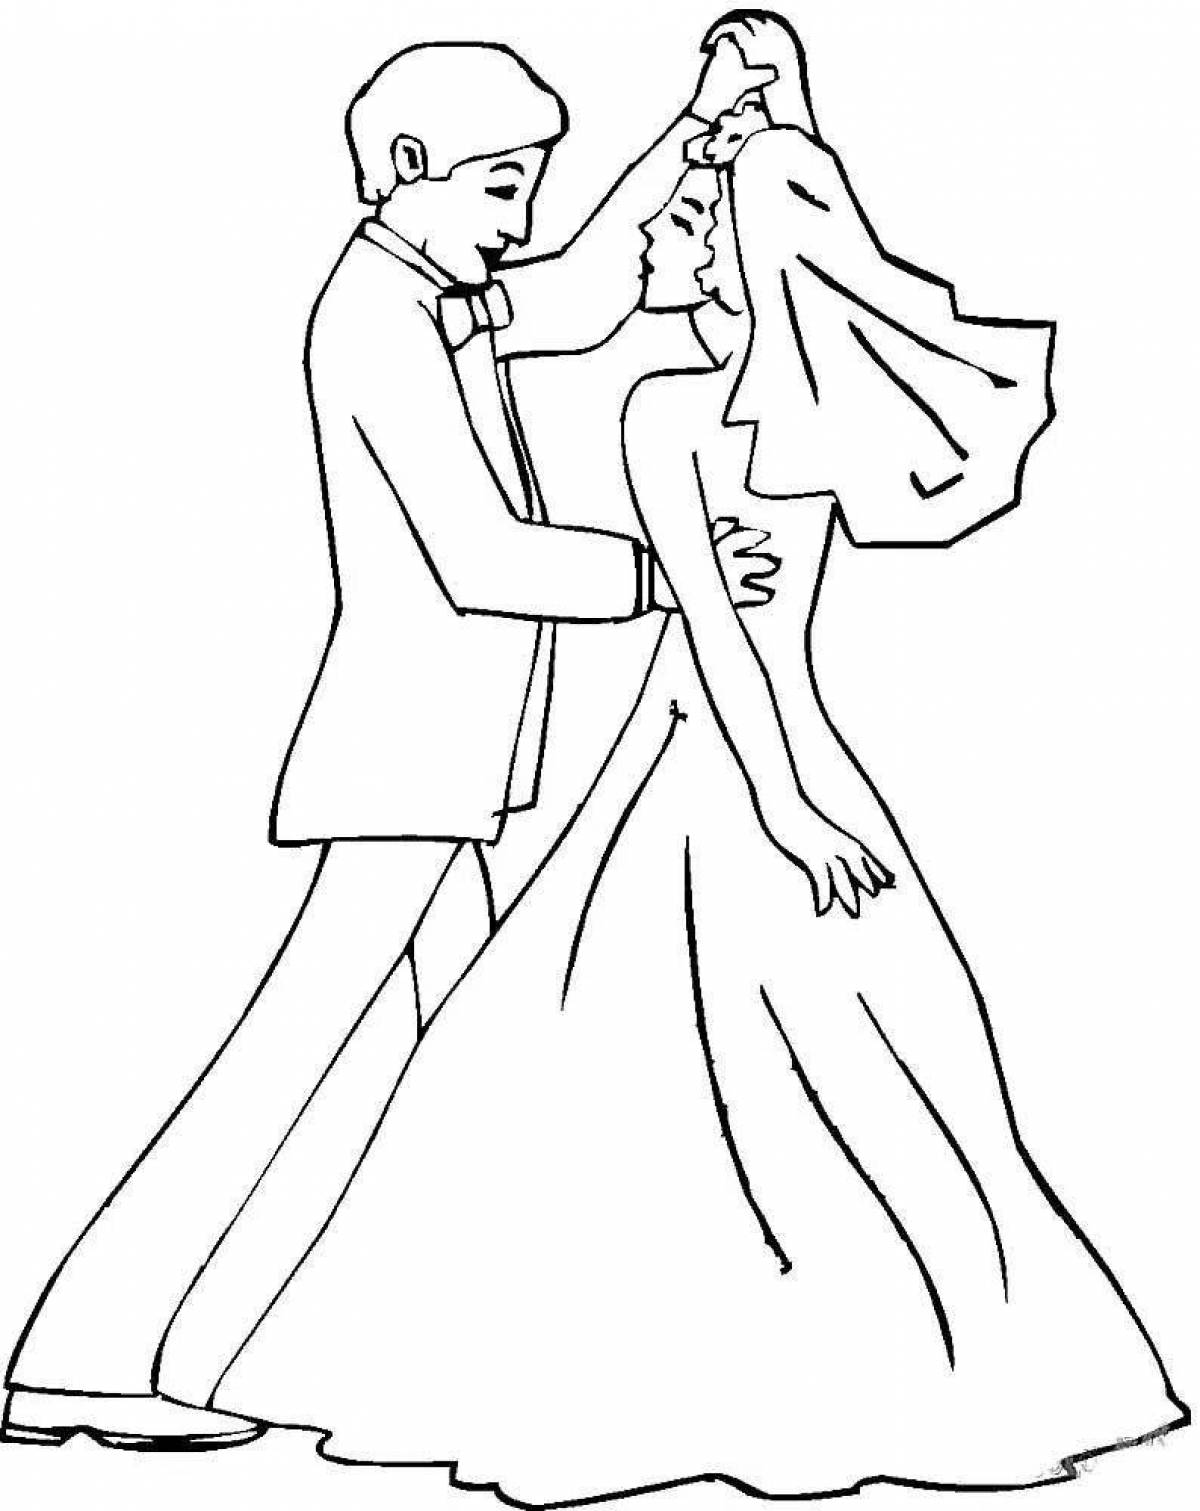 Cheerful wife and husband coloring book